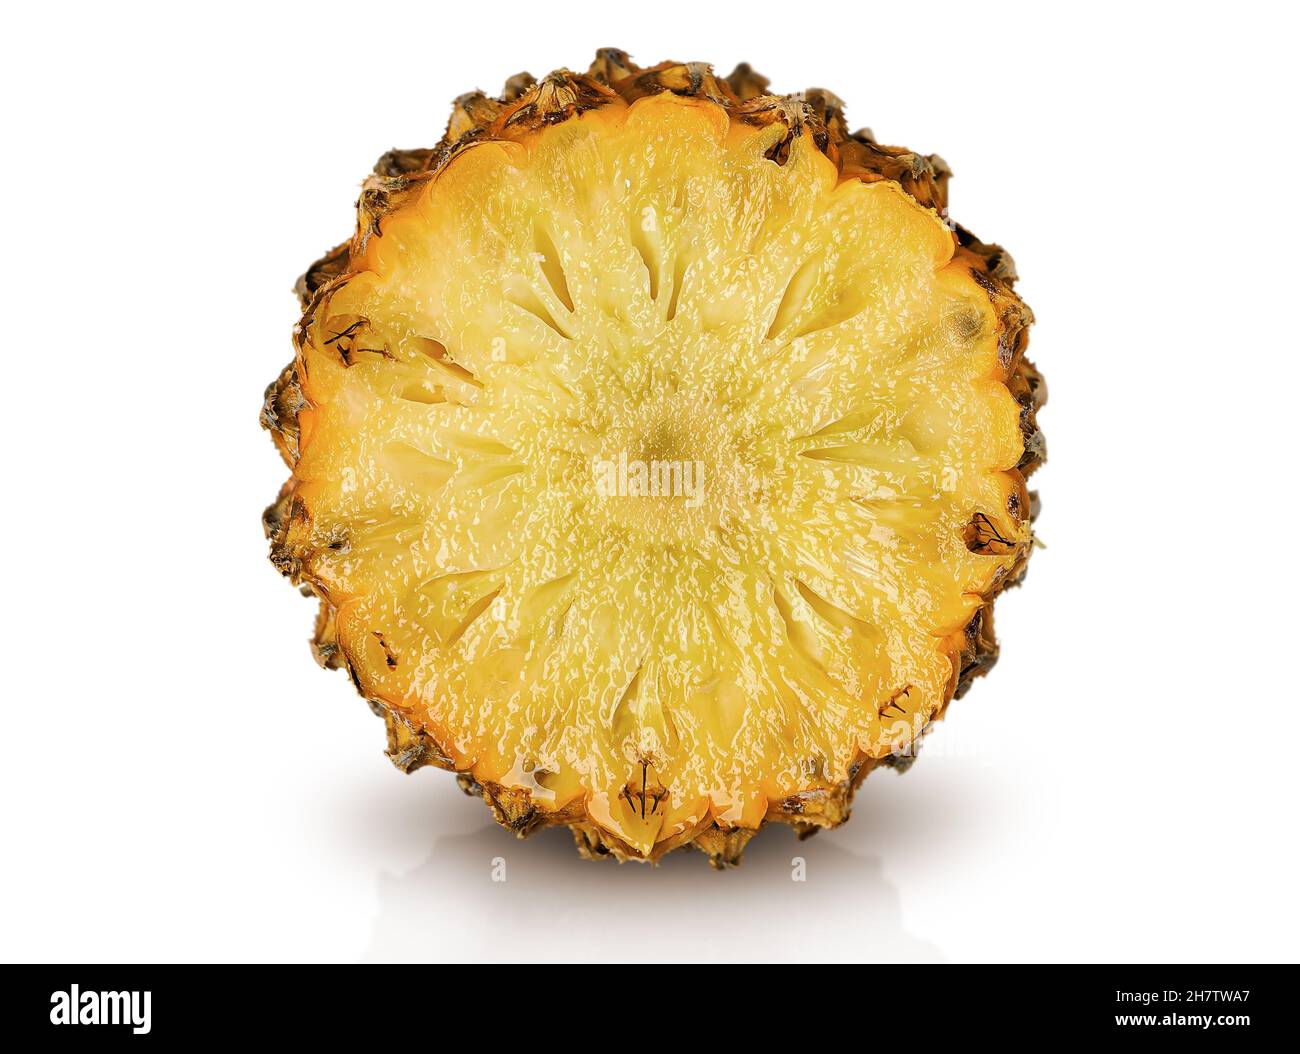 Half of pineapple slice side view isolated on white background Stock Photo